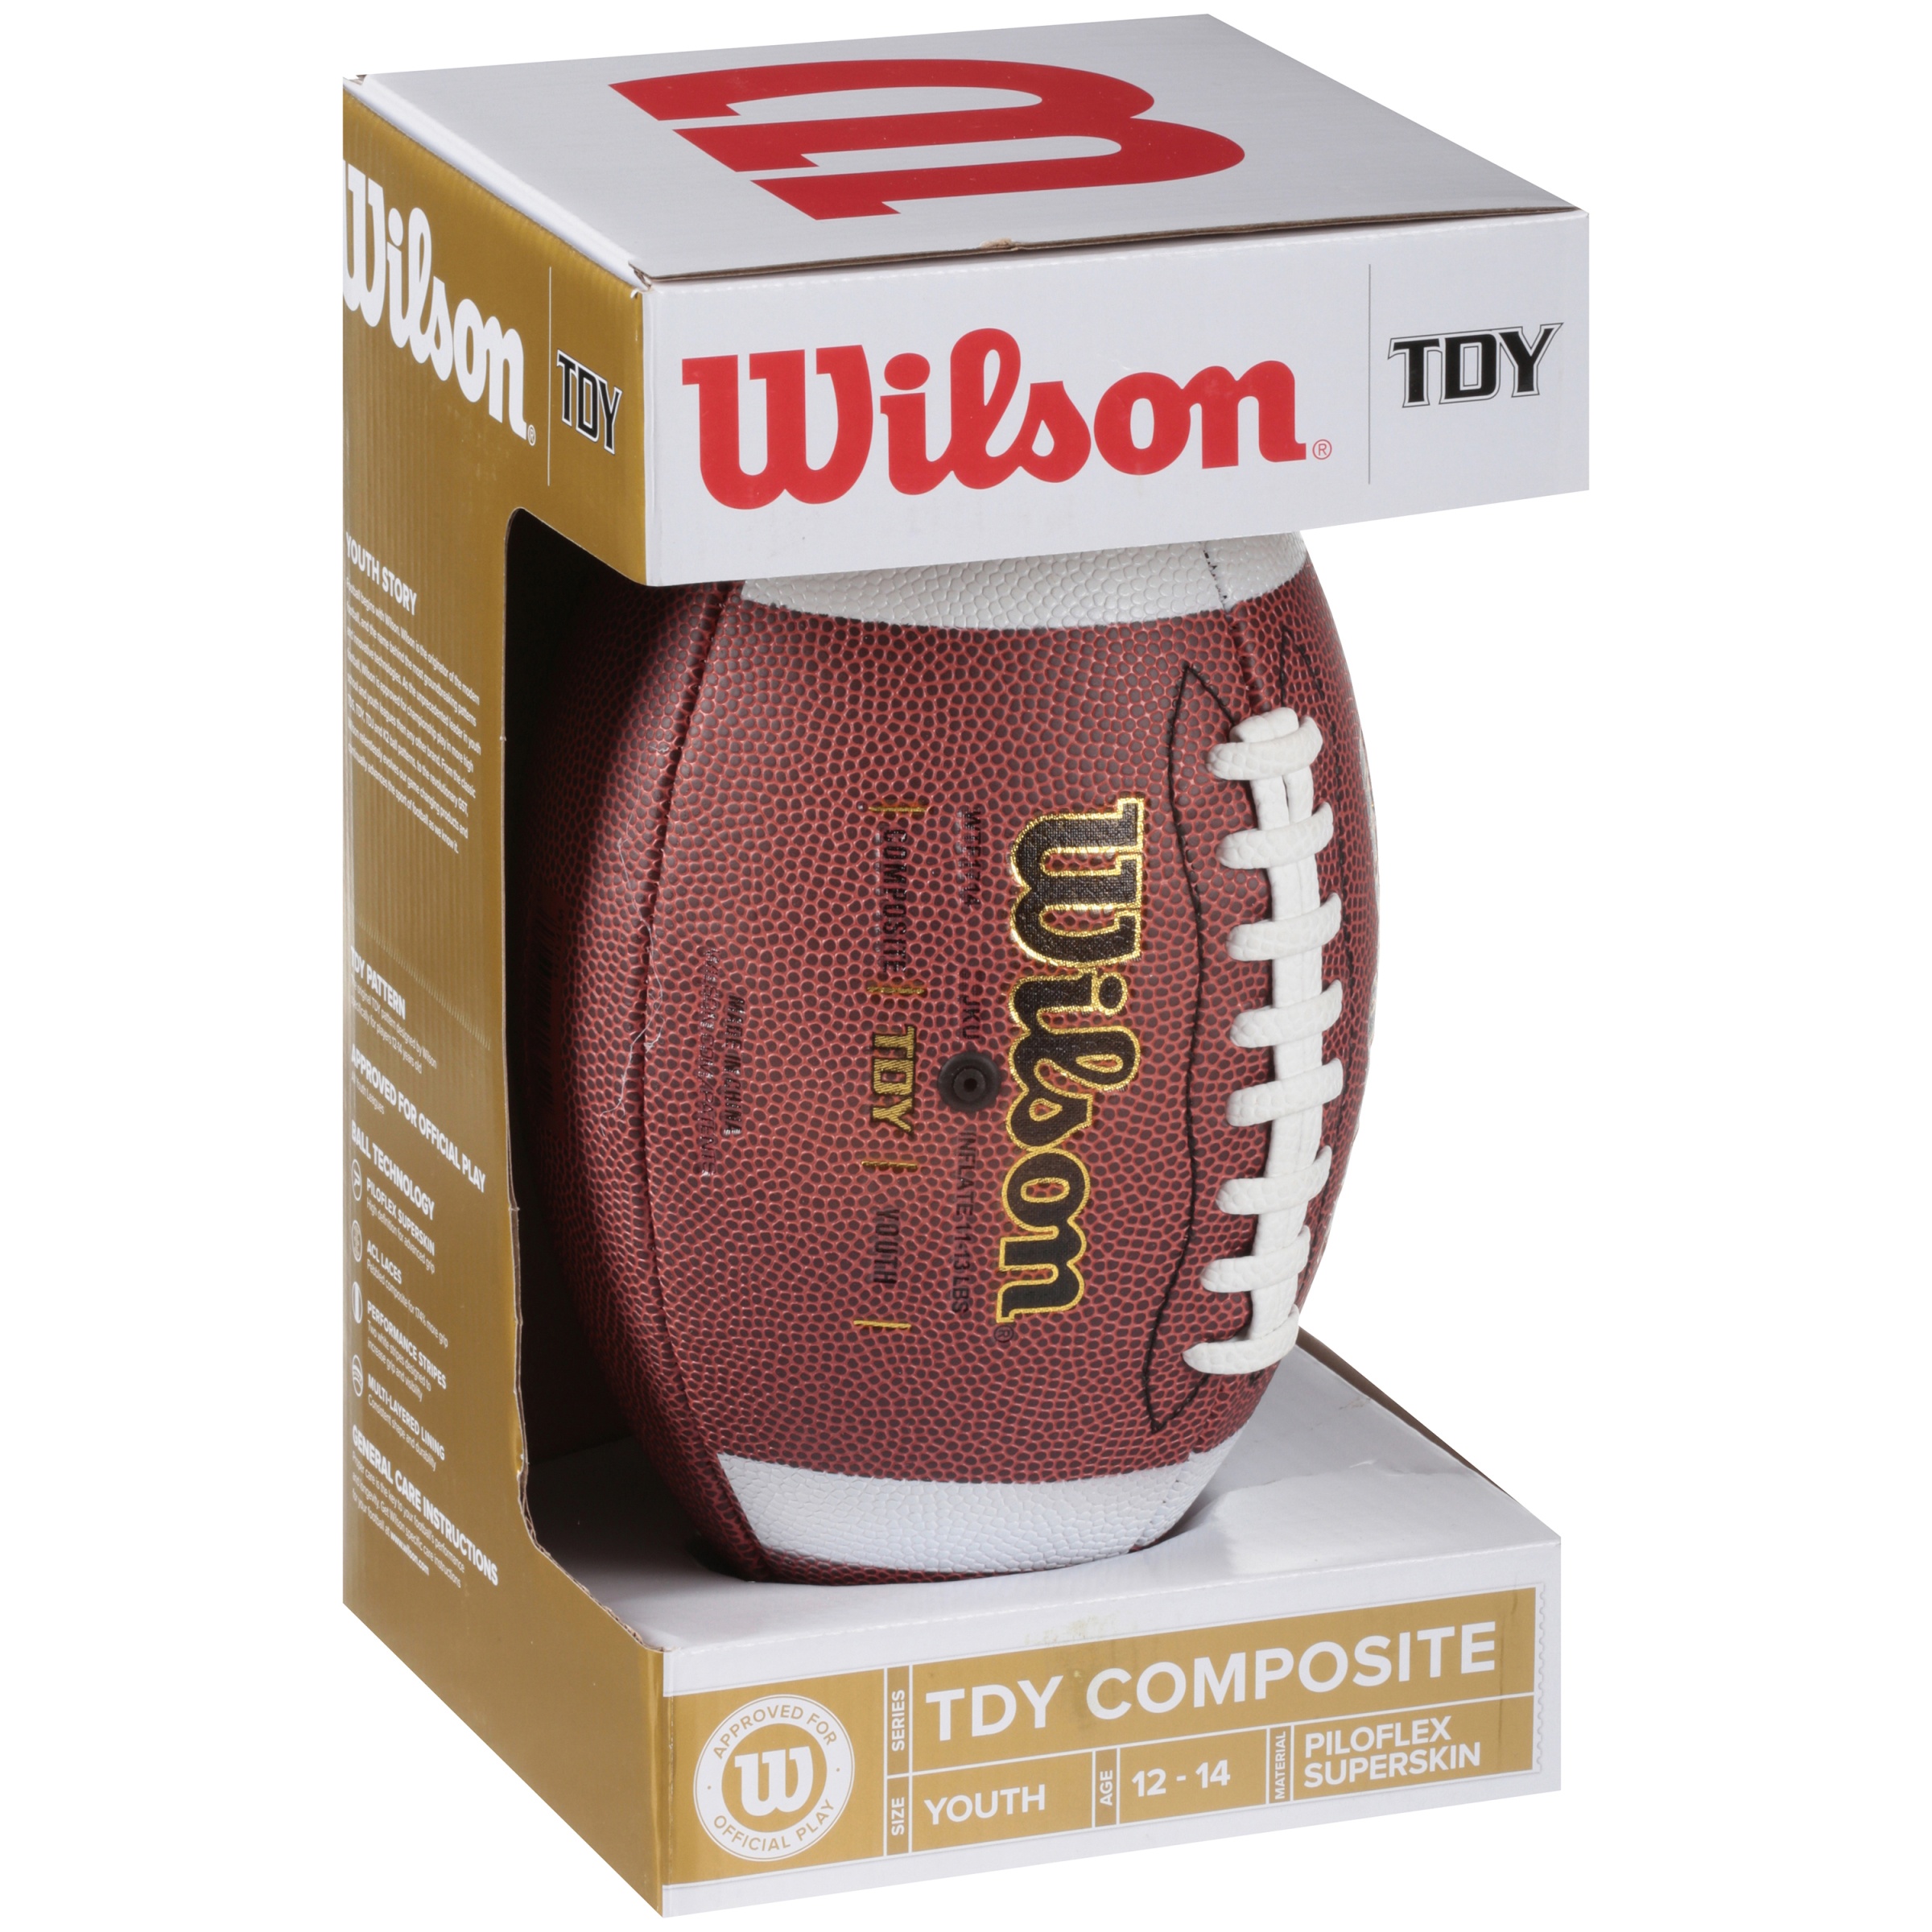 Wilson TDY Composite Football - Youth - image 2 of 5